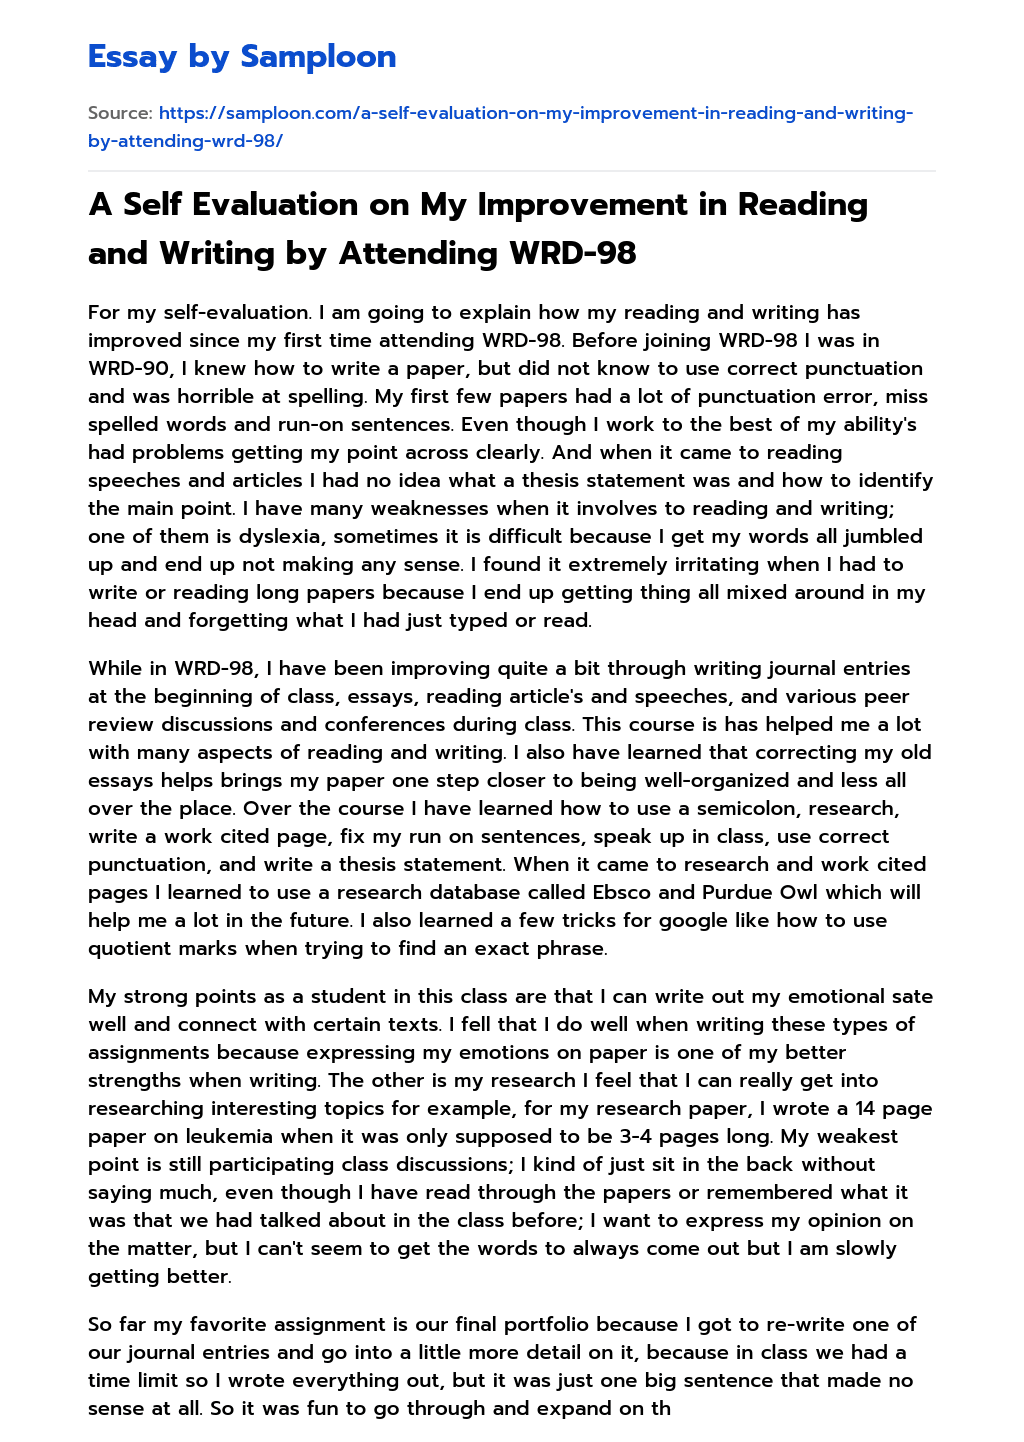 A Self Evaluation on My Improvement in Reading and Writing by Attending WRD-98 essay